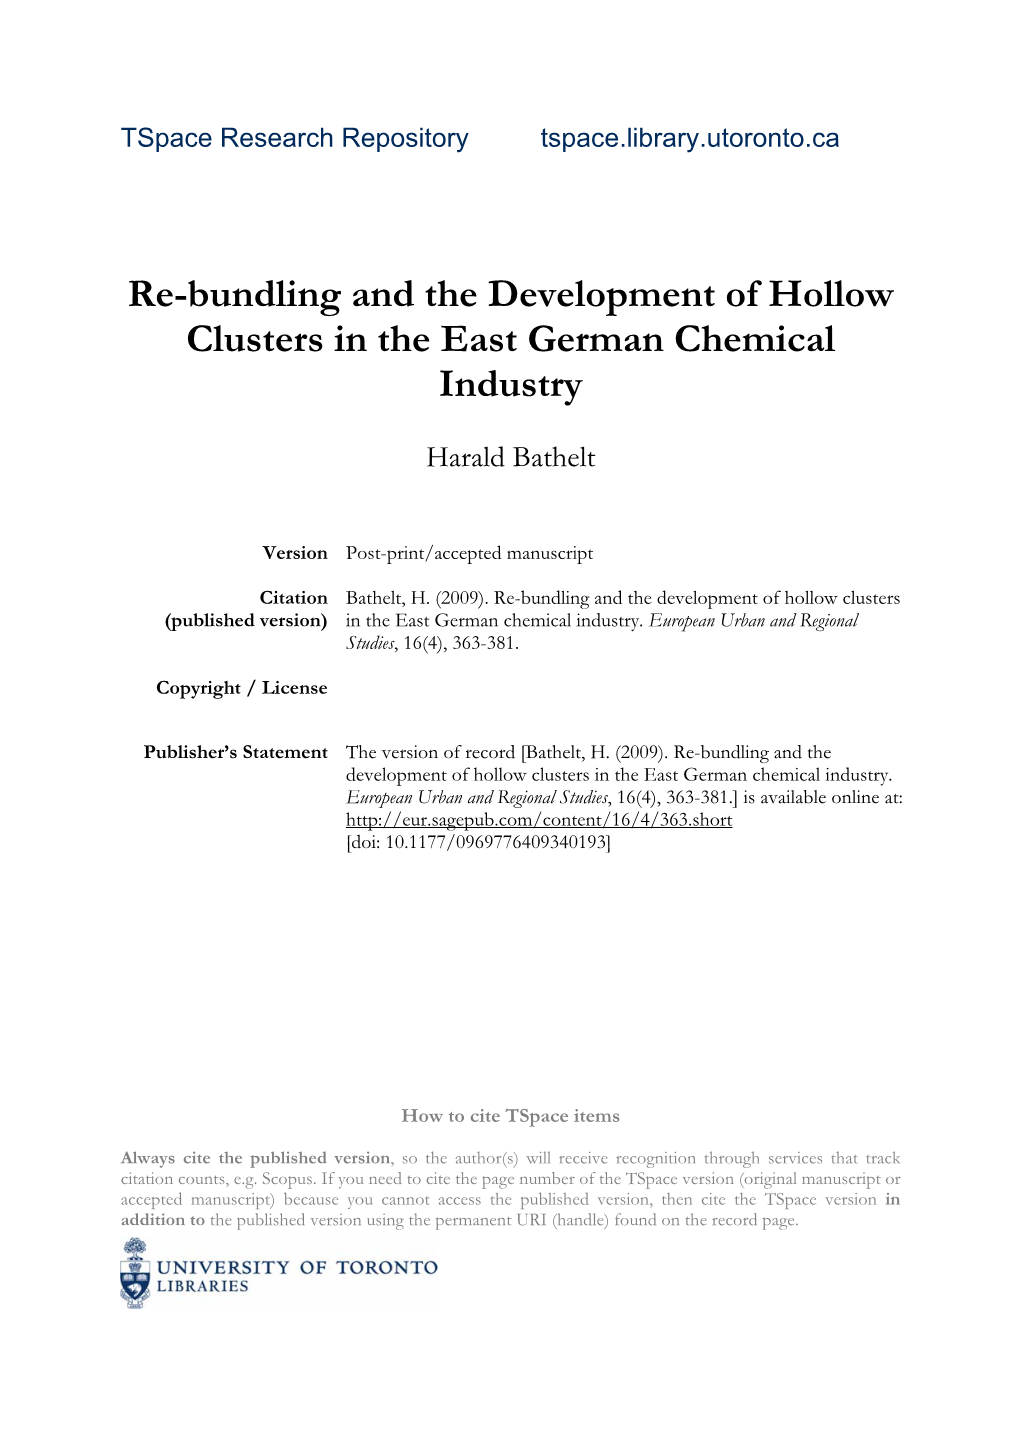 Re-Bundling and the Development of Hollow Clusters in the East German Chemical Industry